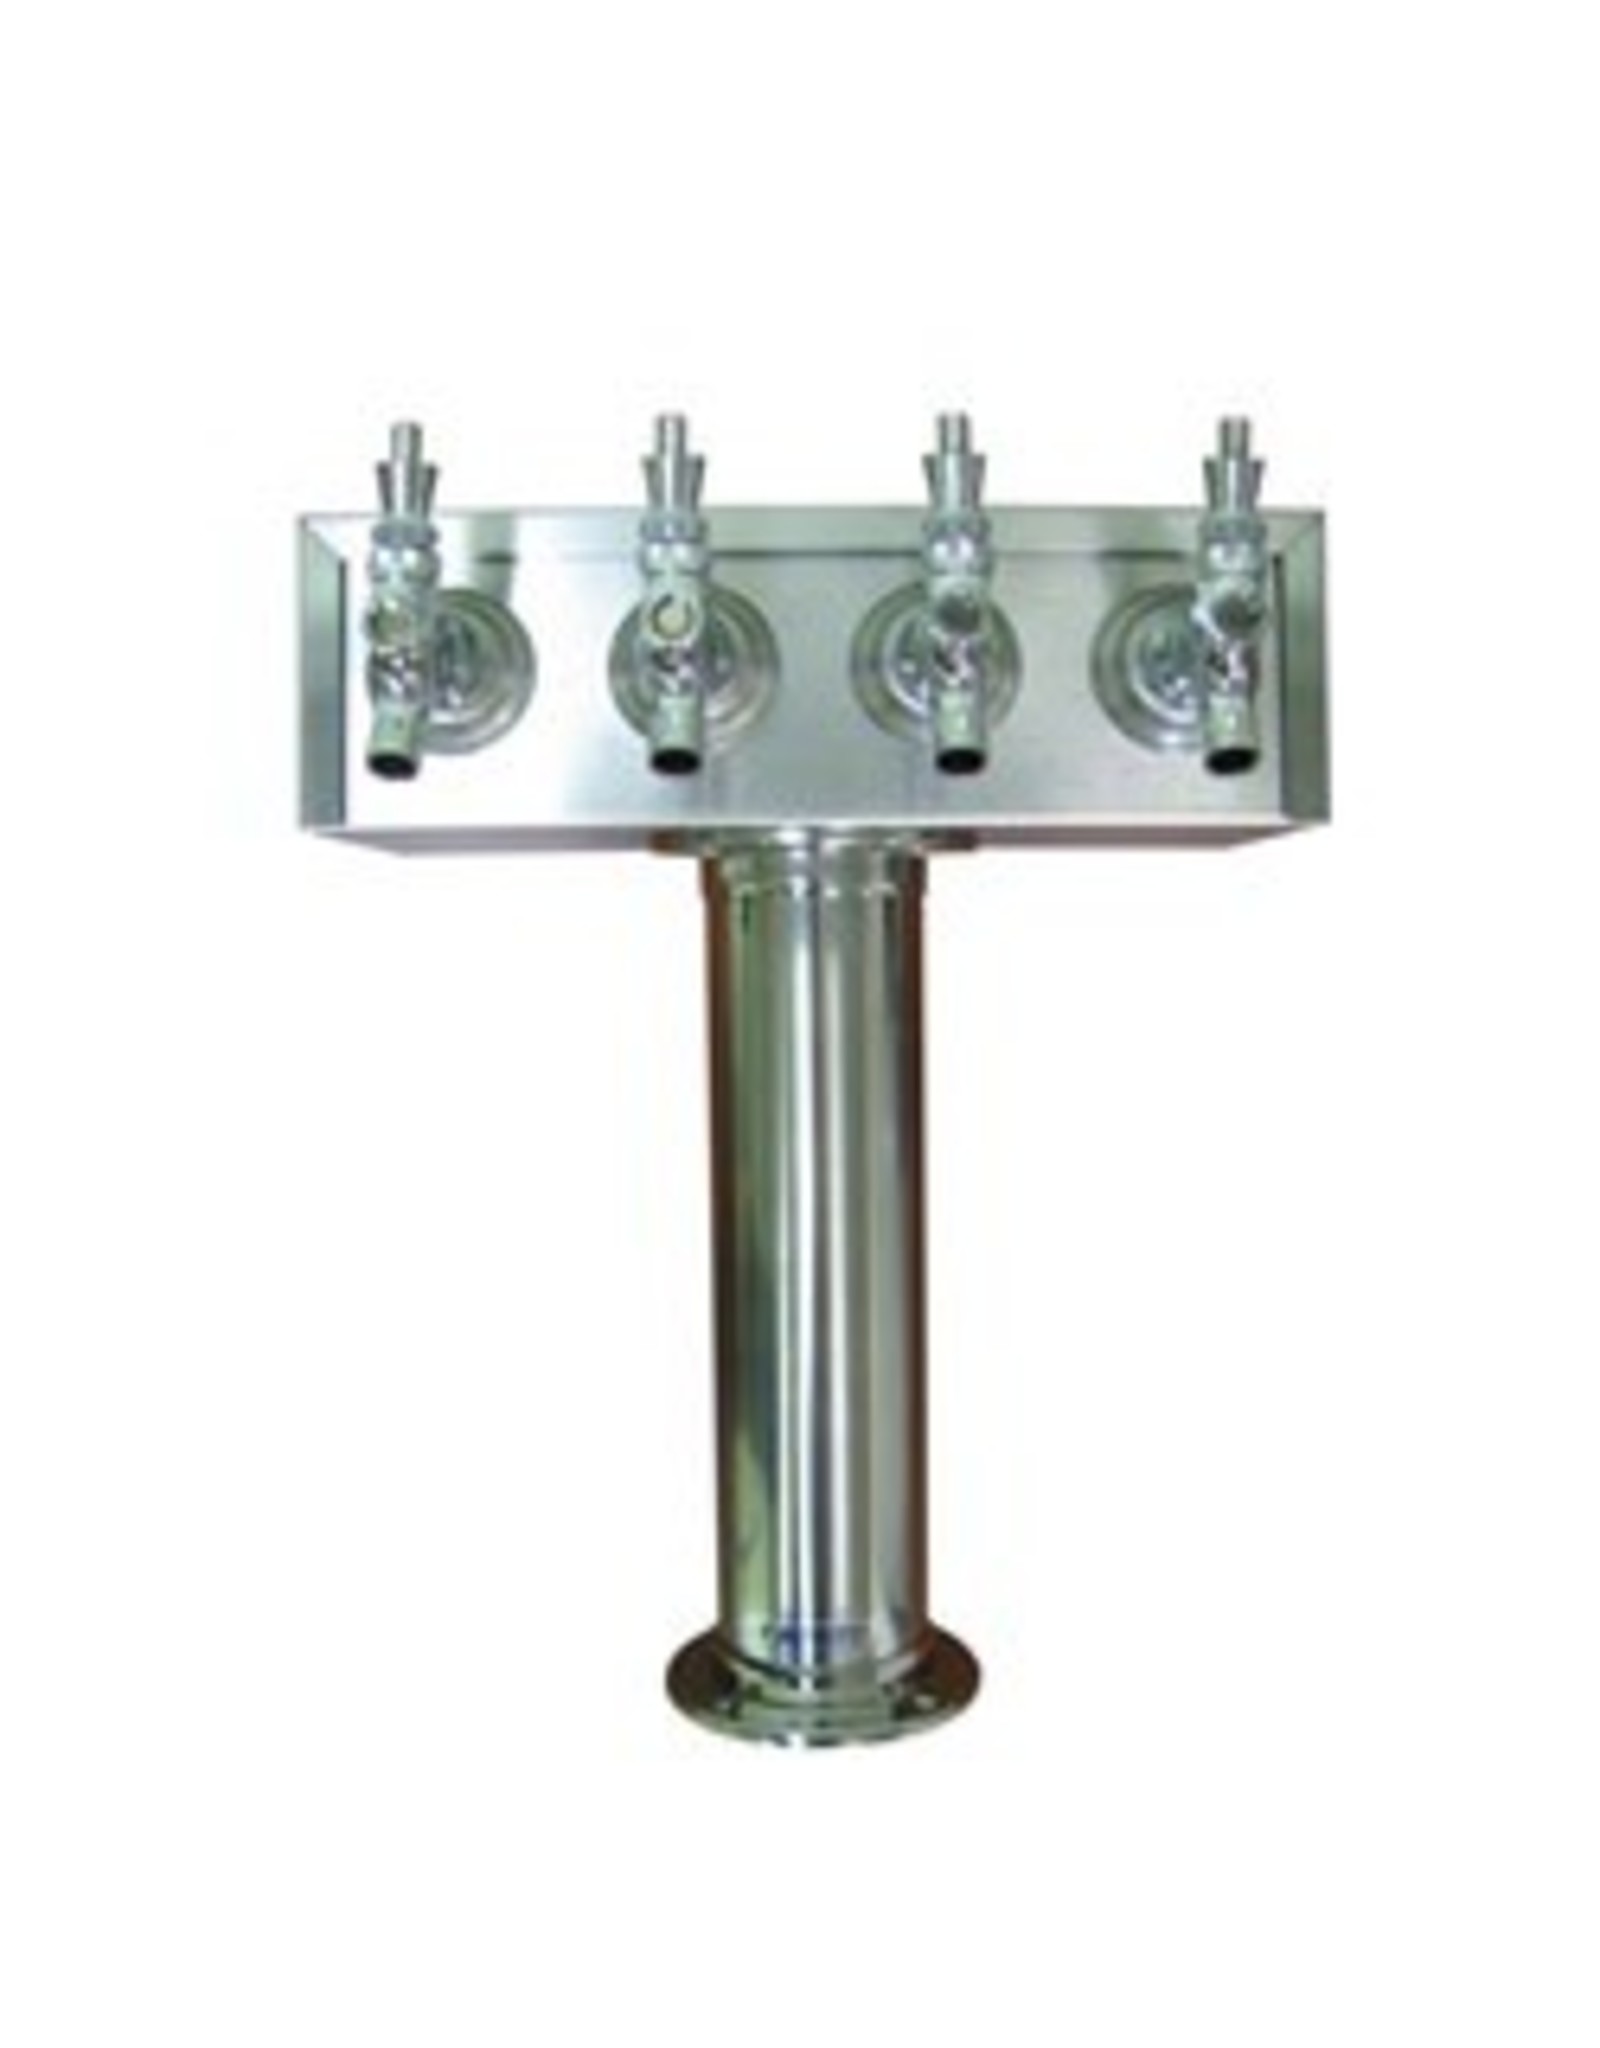 STAINLESS STEEL T TOWER 4 TAP